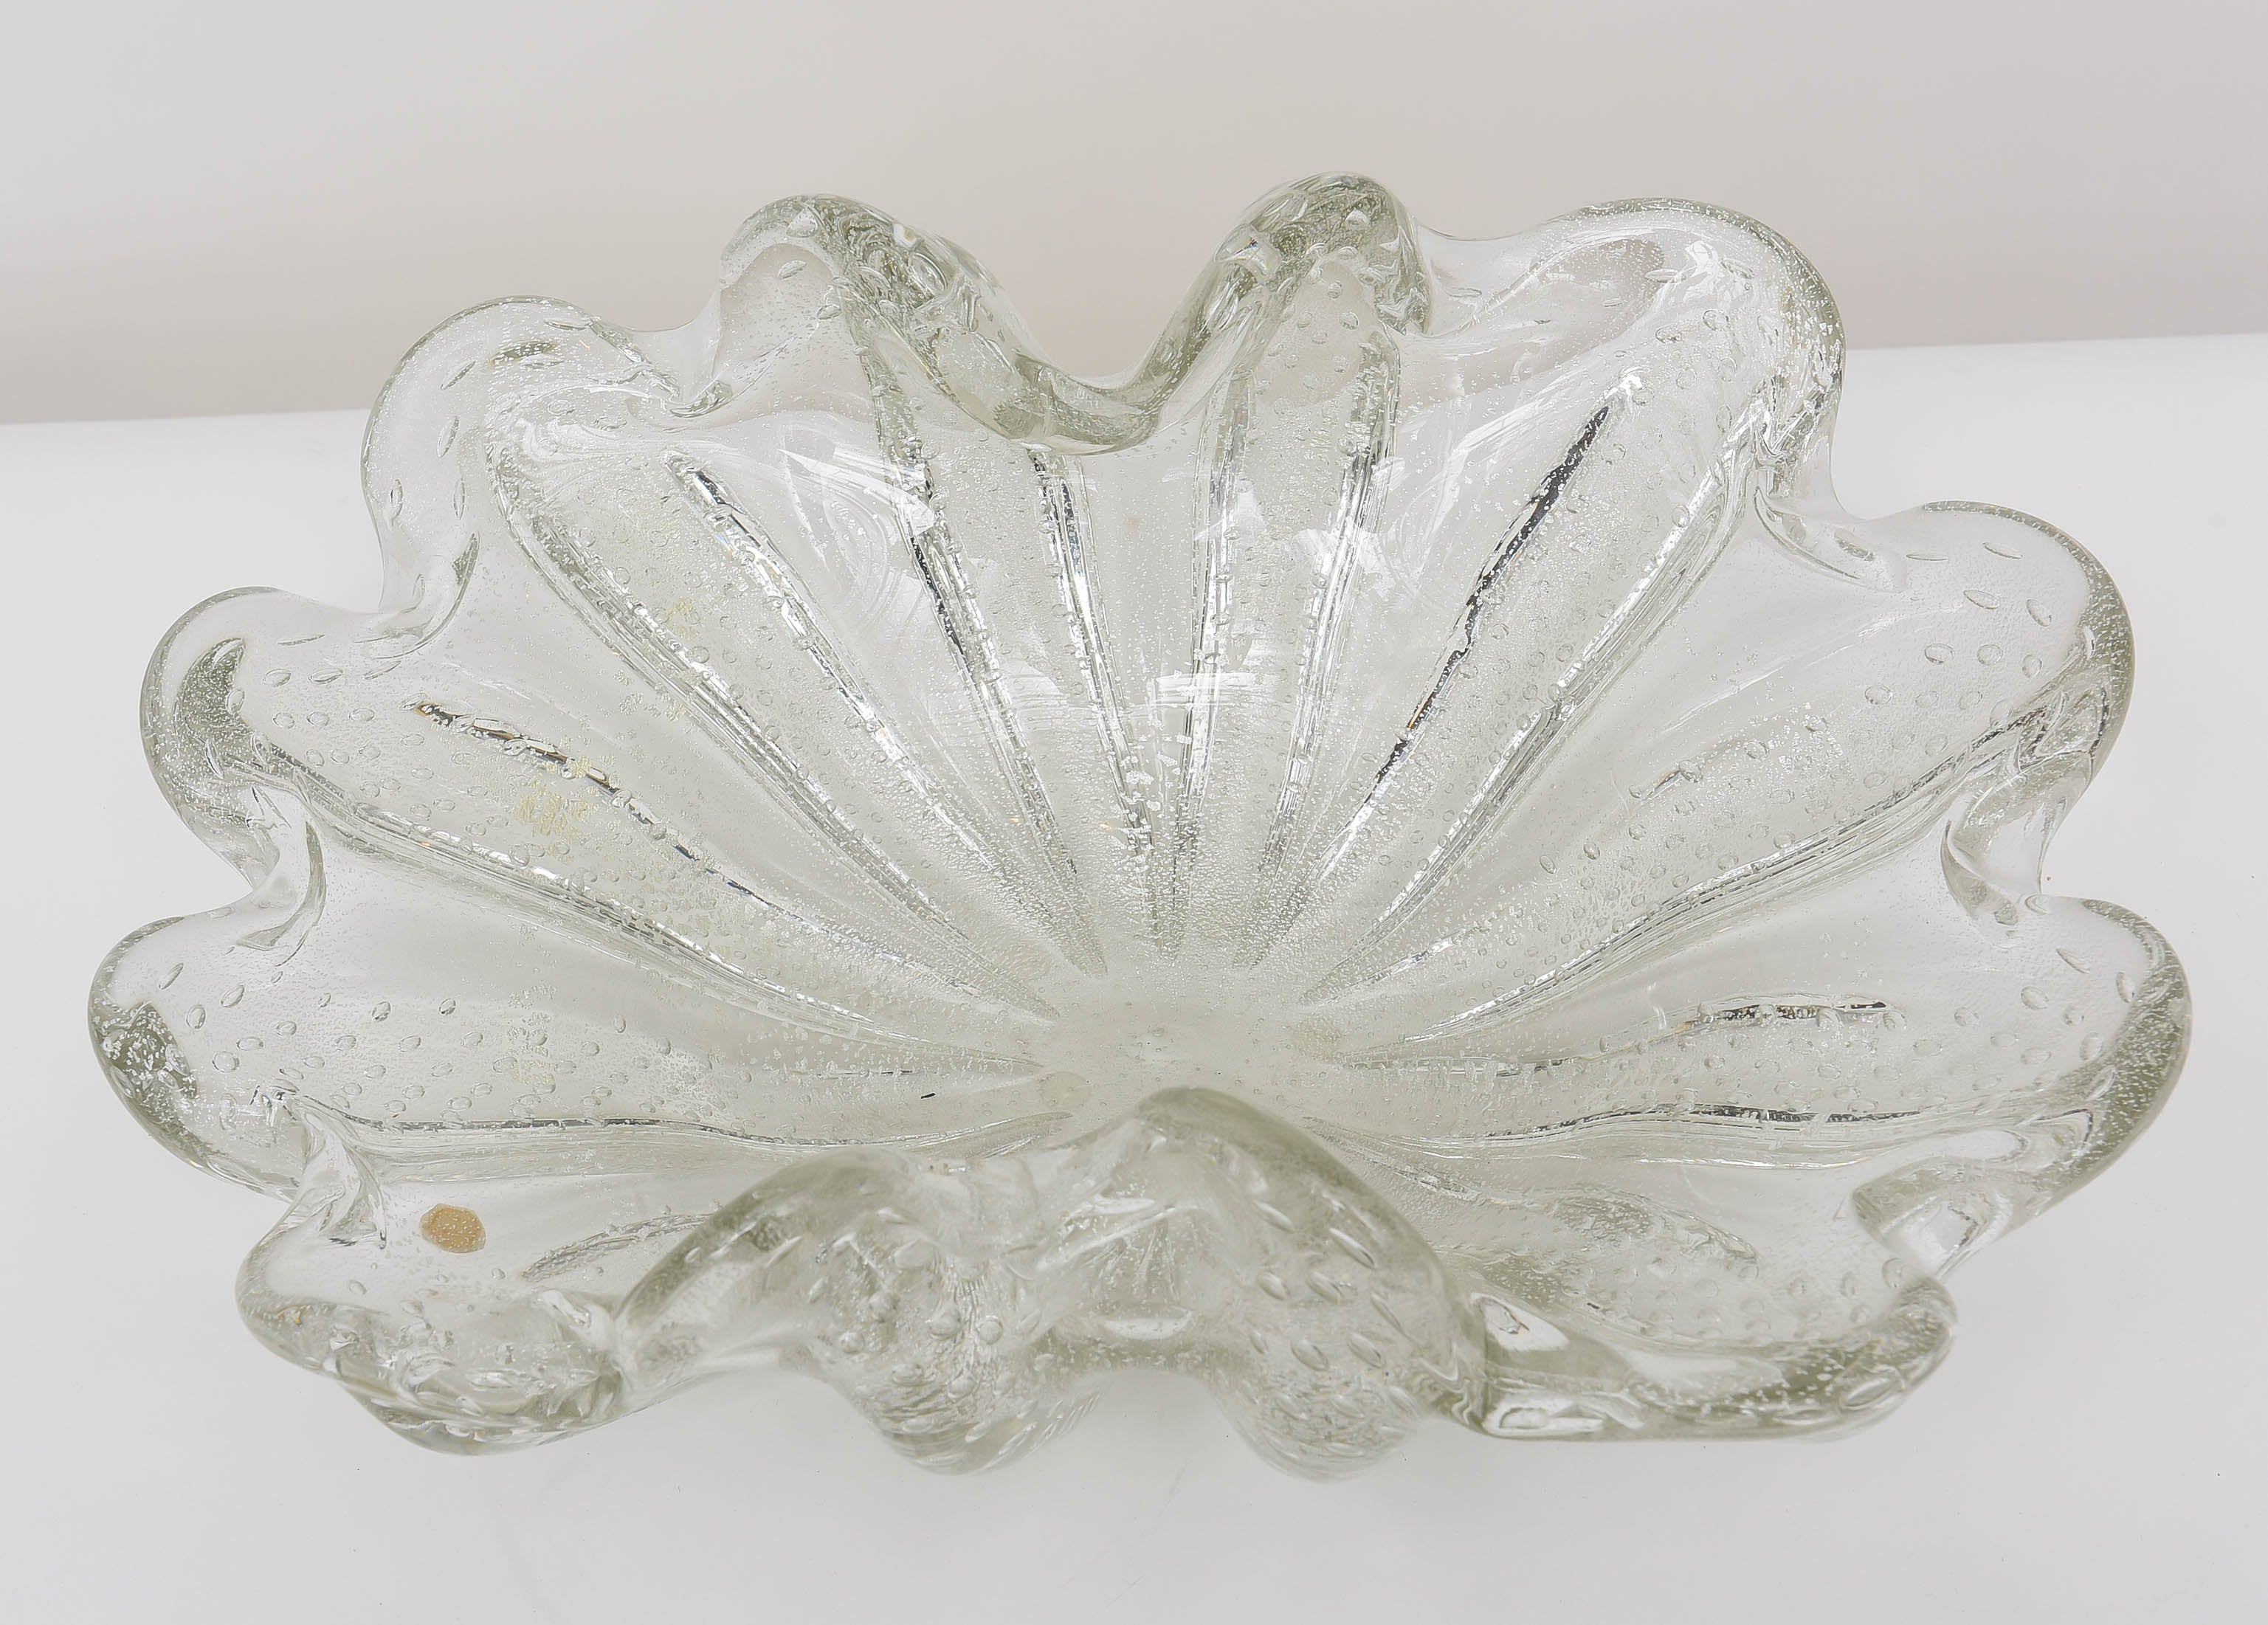 Mid-Century Modern Large Murano Glass Centerpiece Bowl by Ercole Barovier